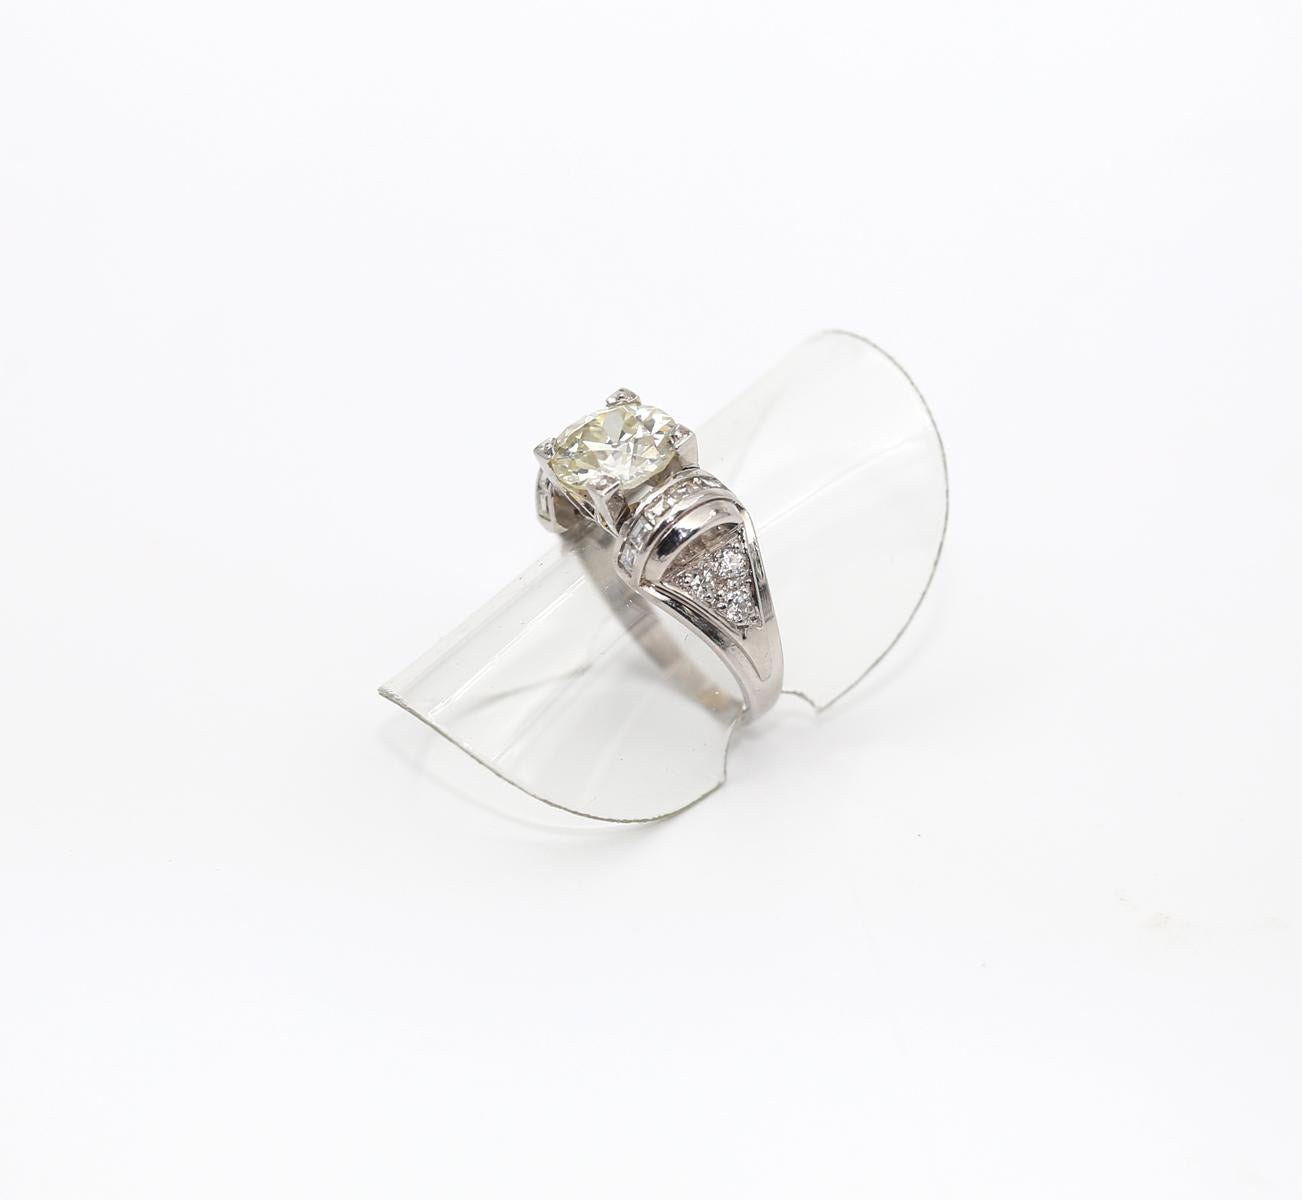 2.75 Carats Diamond Ring White Gold 18K Certified, 1920 In Fair Condition For Sale In Herzelia, Tel Aviv